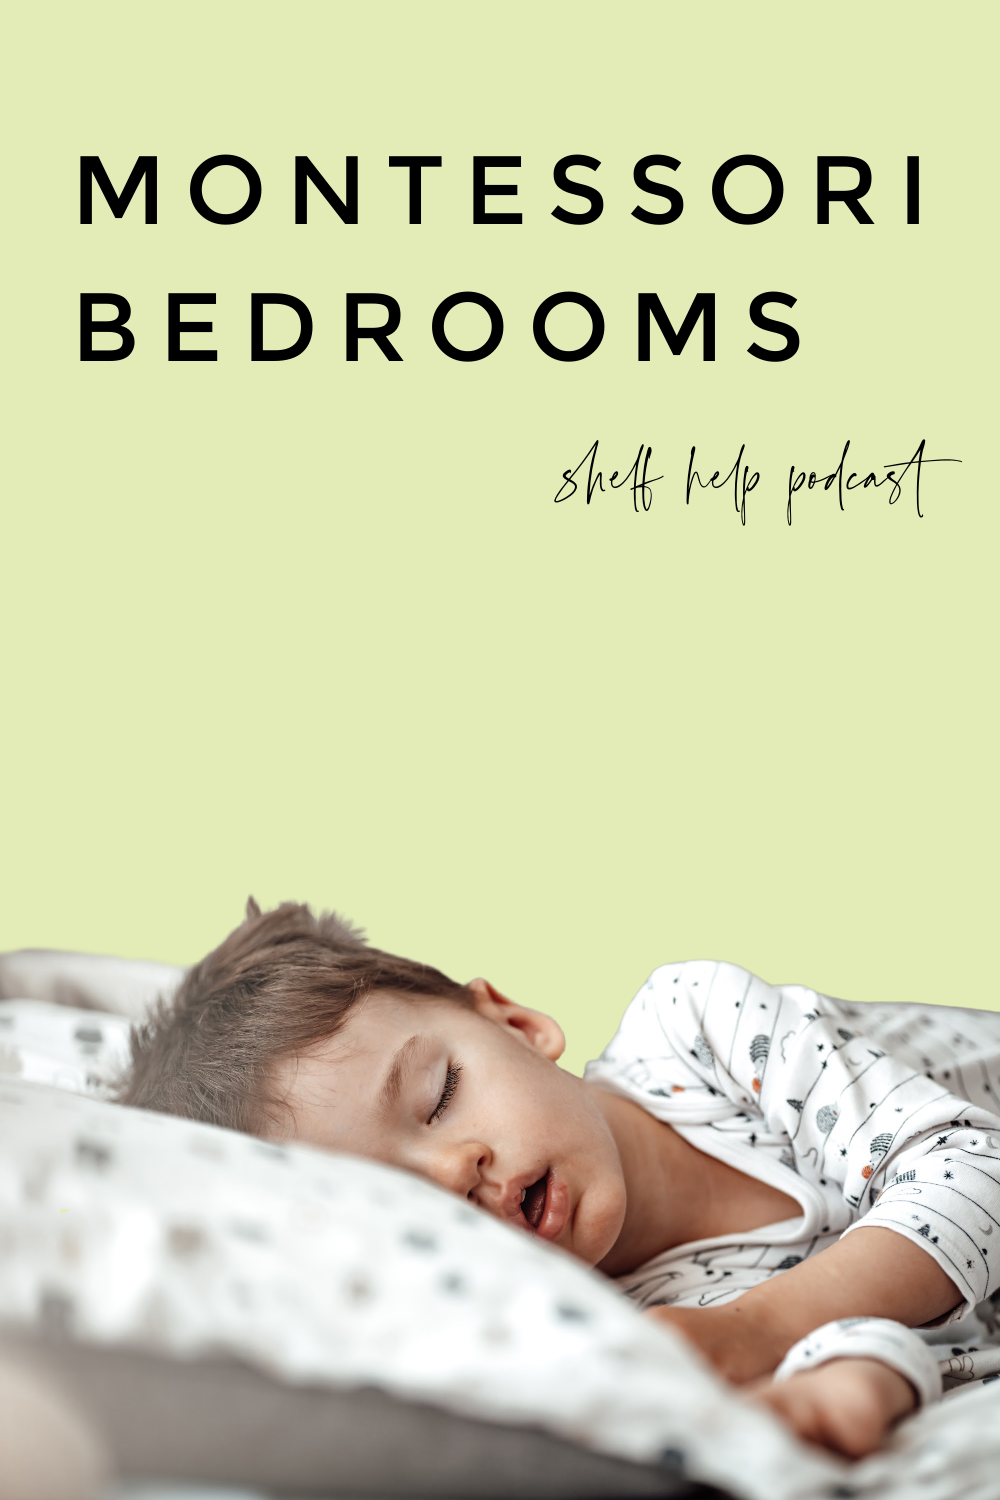 In this Montessori parenting podcast, we address Montessori bedrooms. We talk about how they might look, what to include and some challenges.